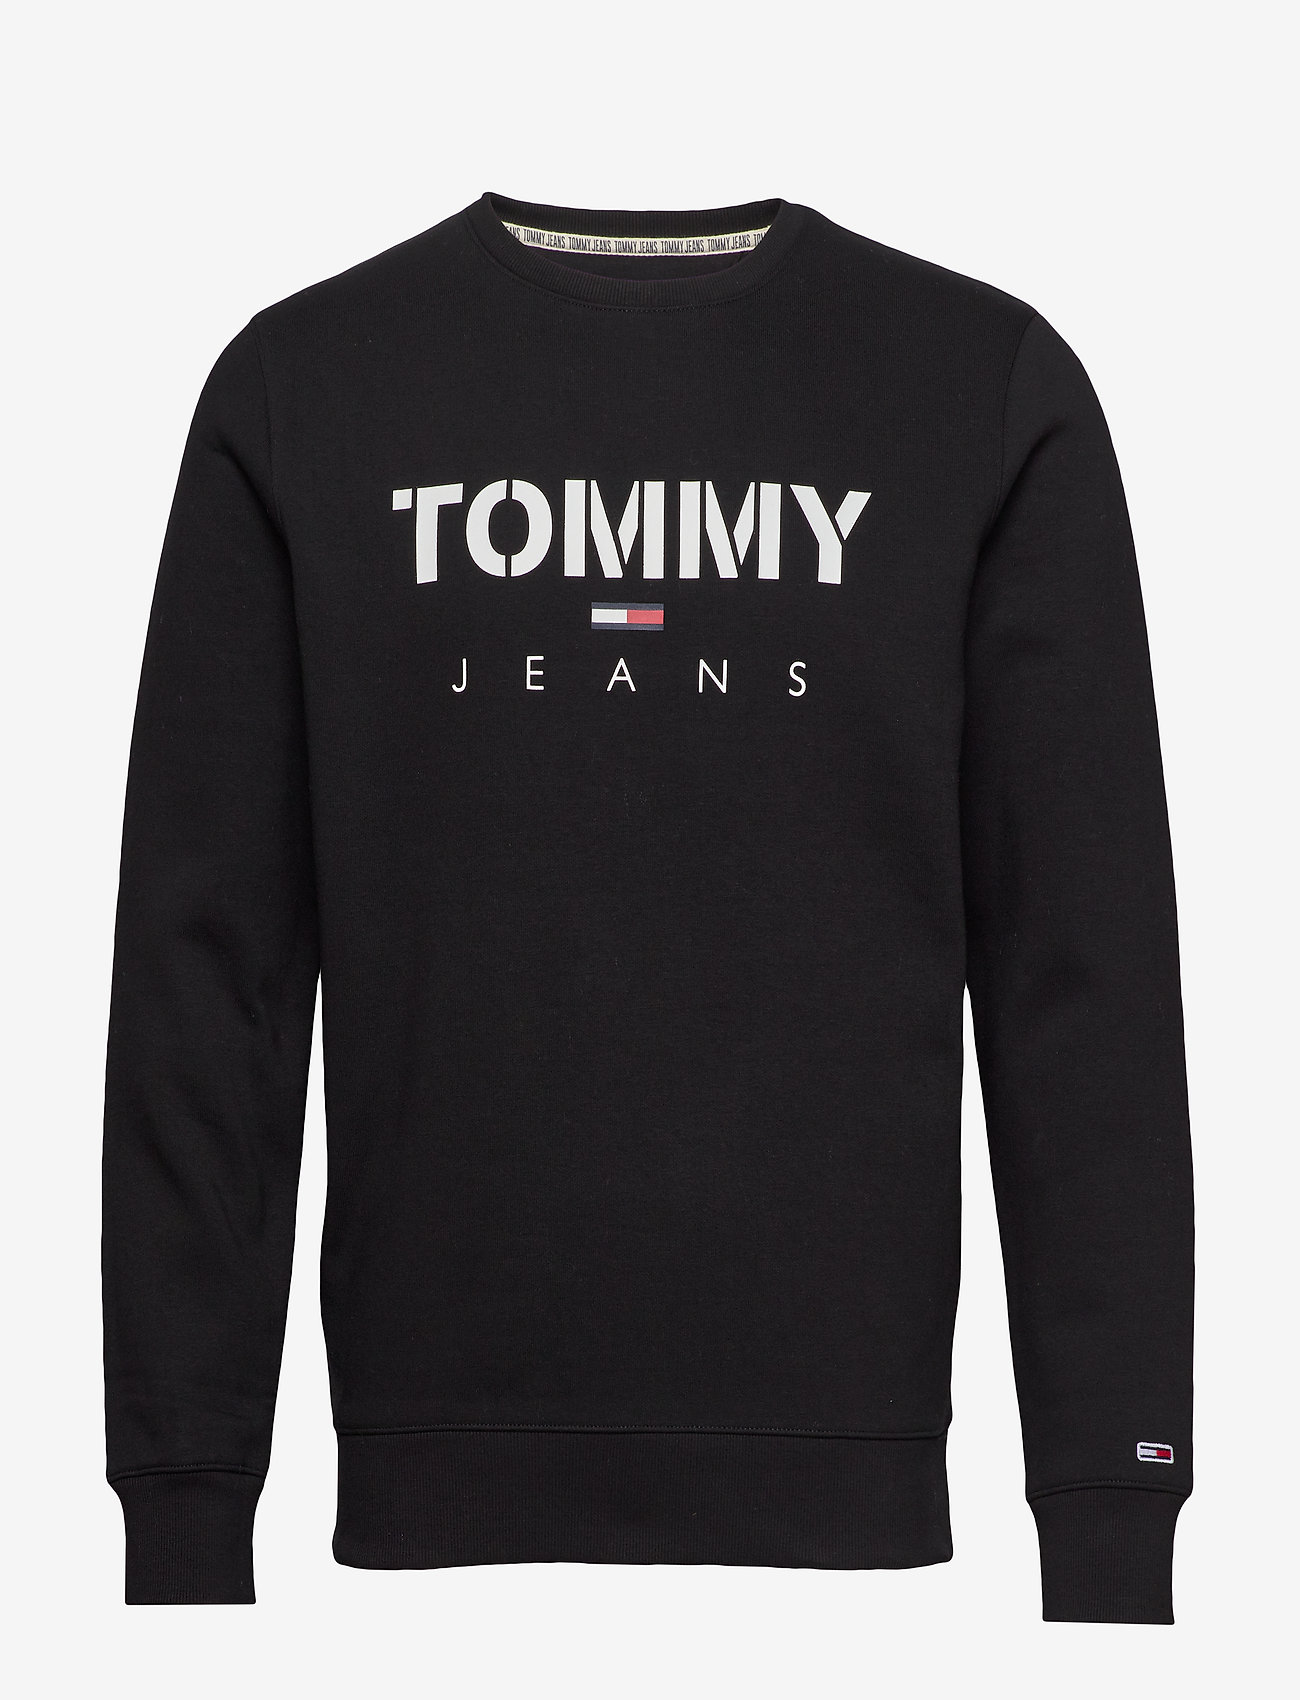 tommy's jeans